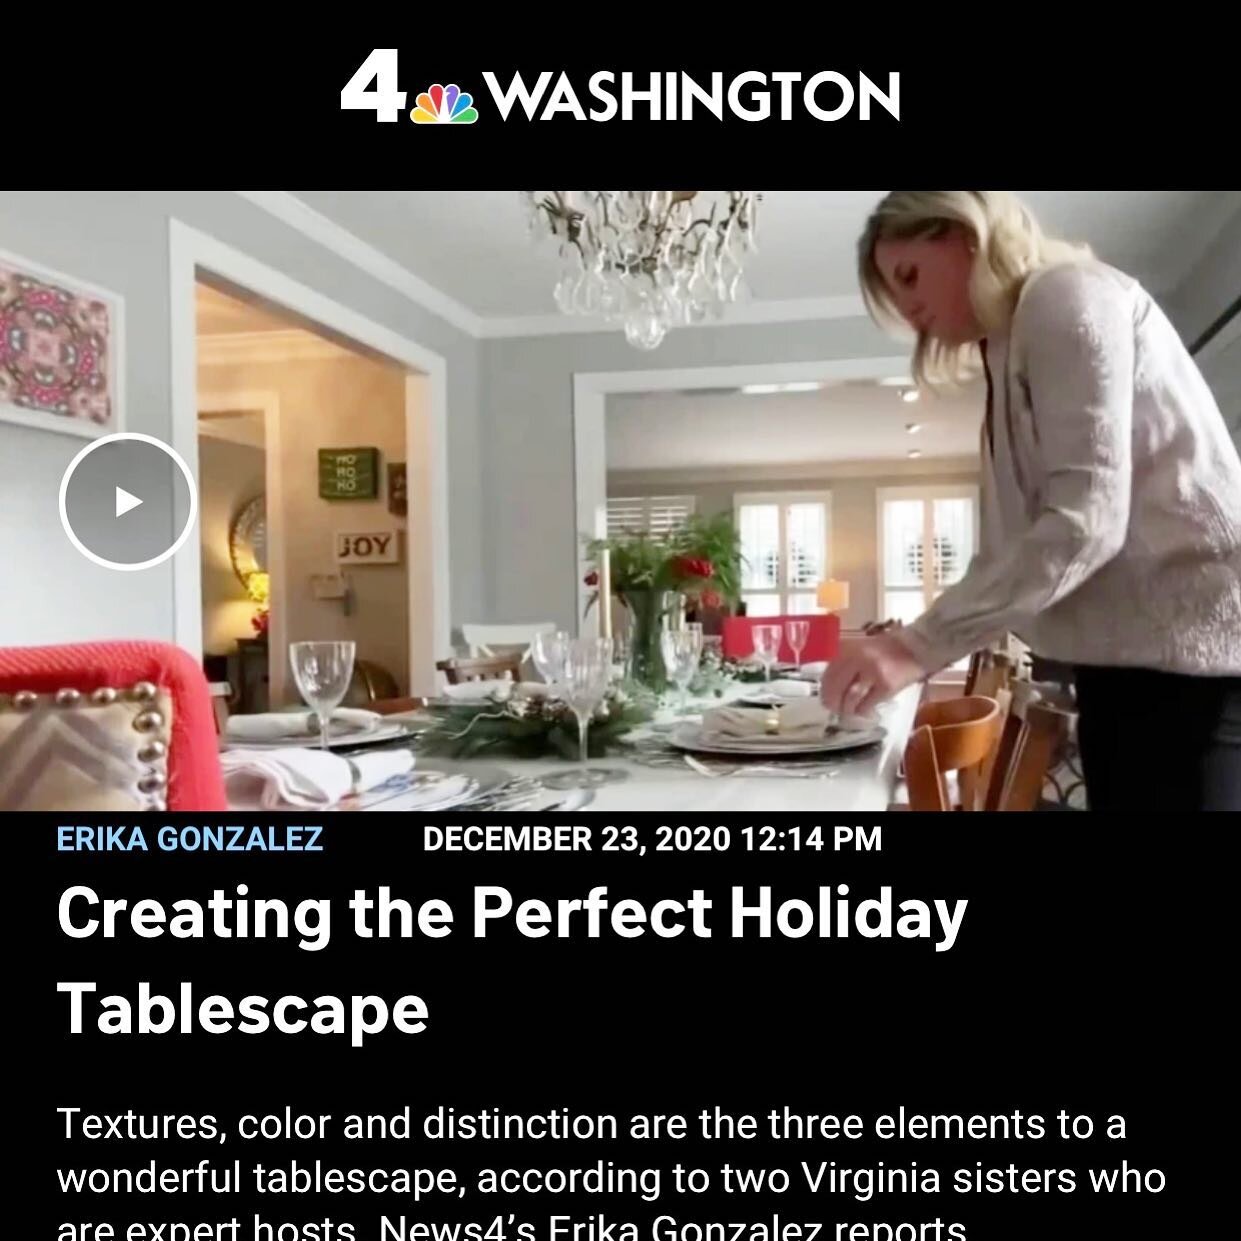 Christmas came early when my sister @collyncapp and I had the opportunity to talk with @erikanbc4 for @nbcwashington  about tips and tricks for creating the perfect holiday table! Thank you Erika for the amazing opportunity and Merry Christmas everyo